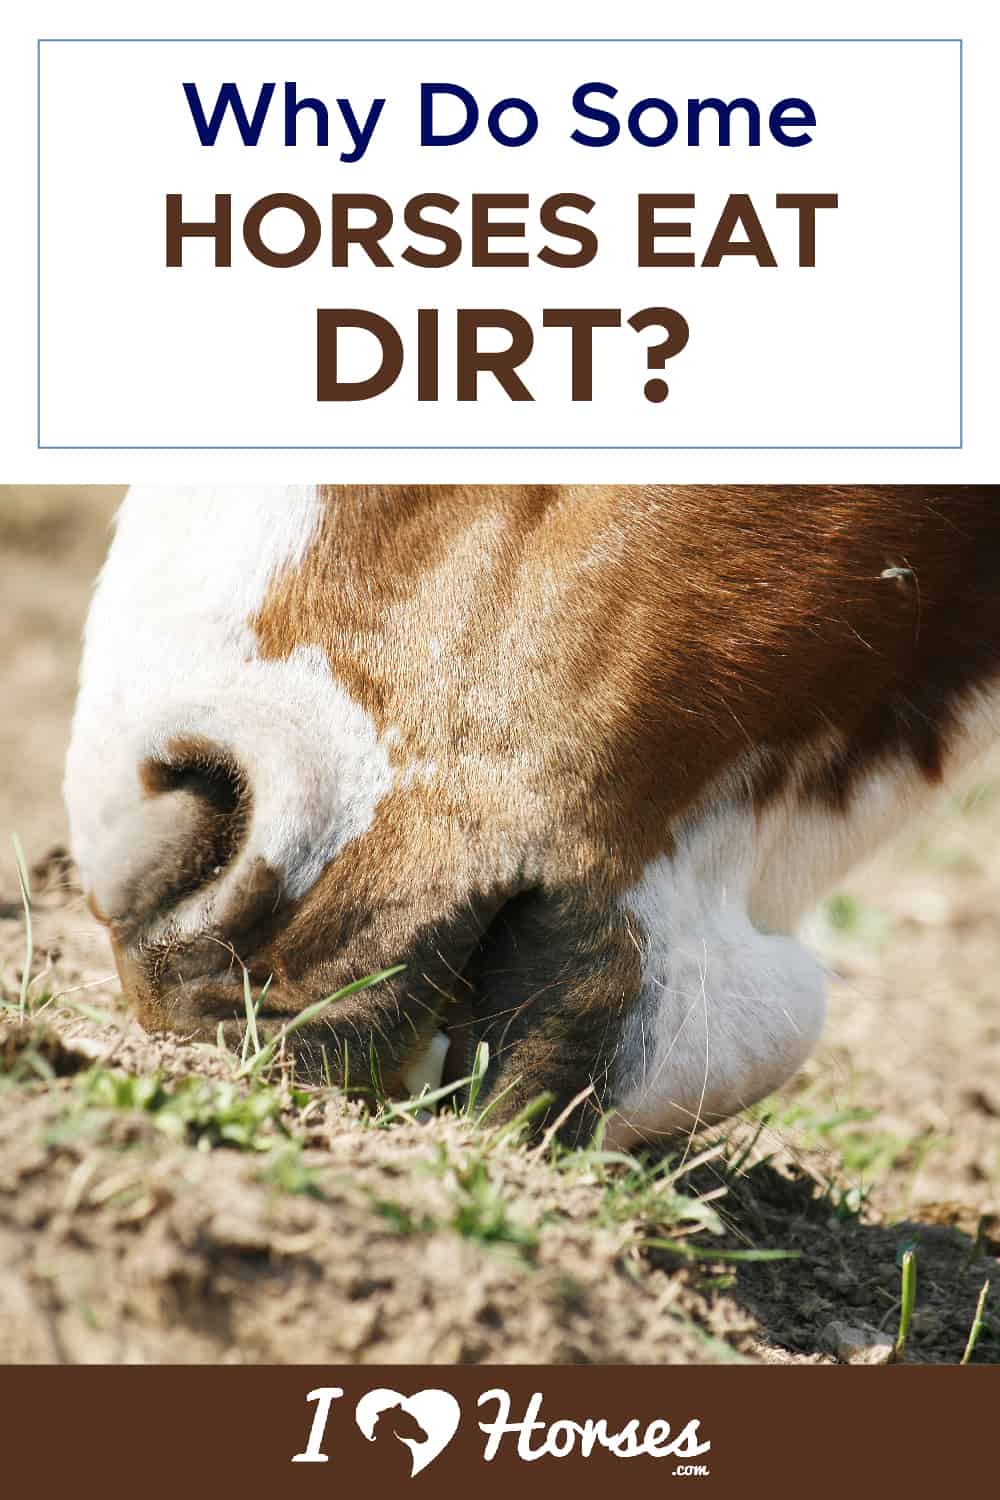 Why Do Some Horses Eat Dirt-01